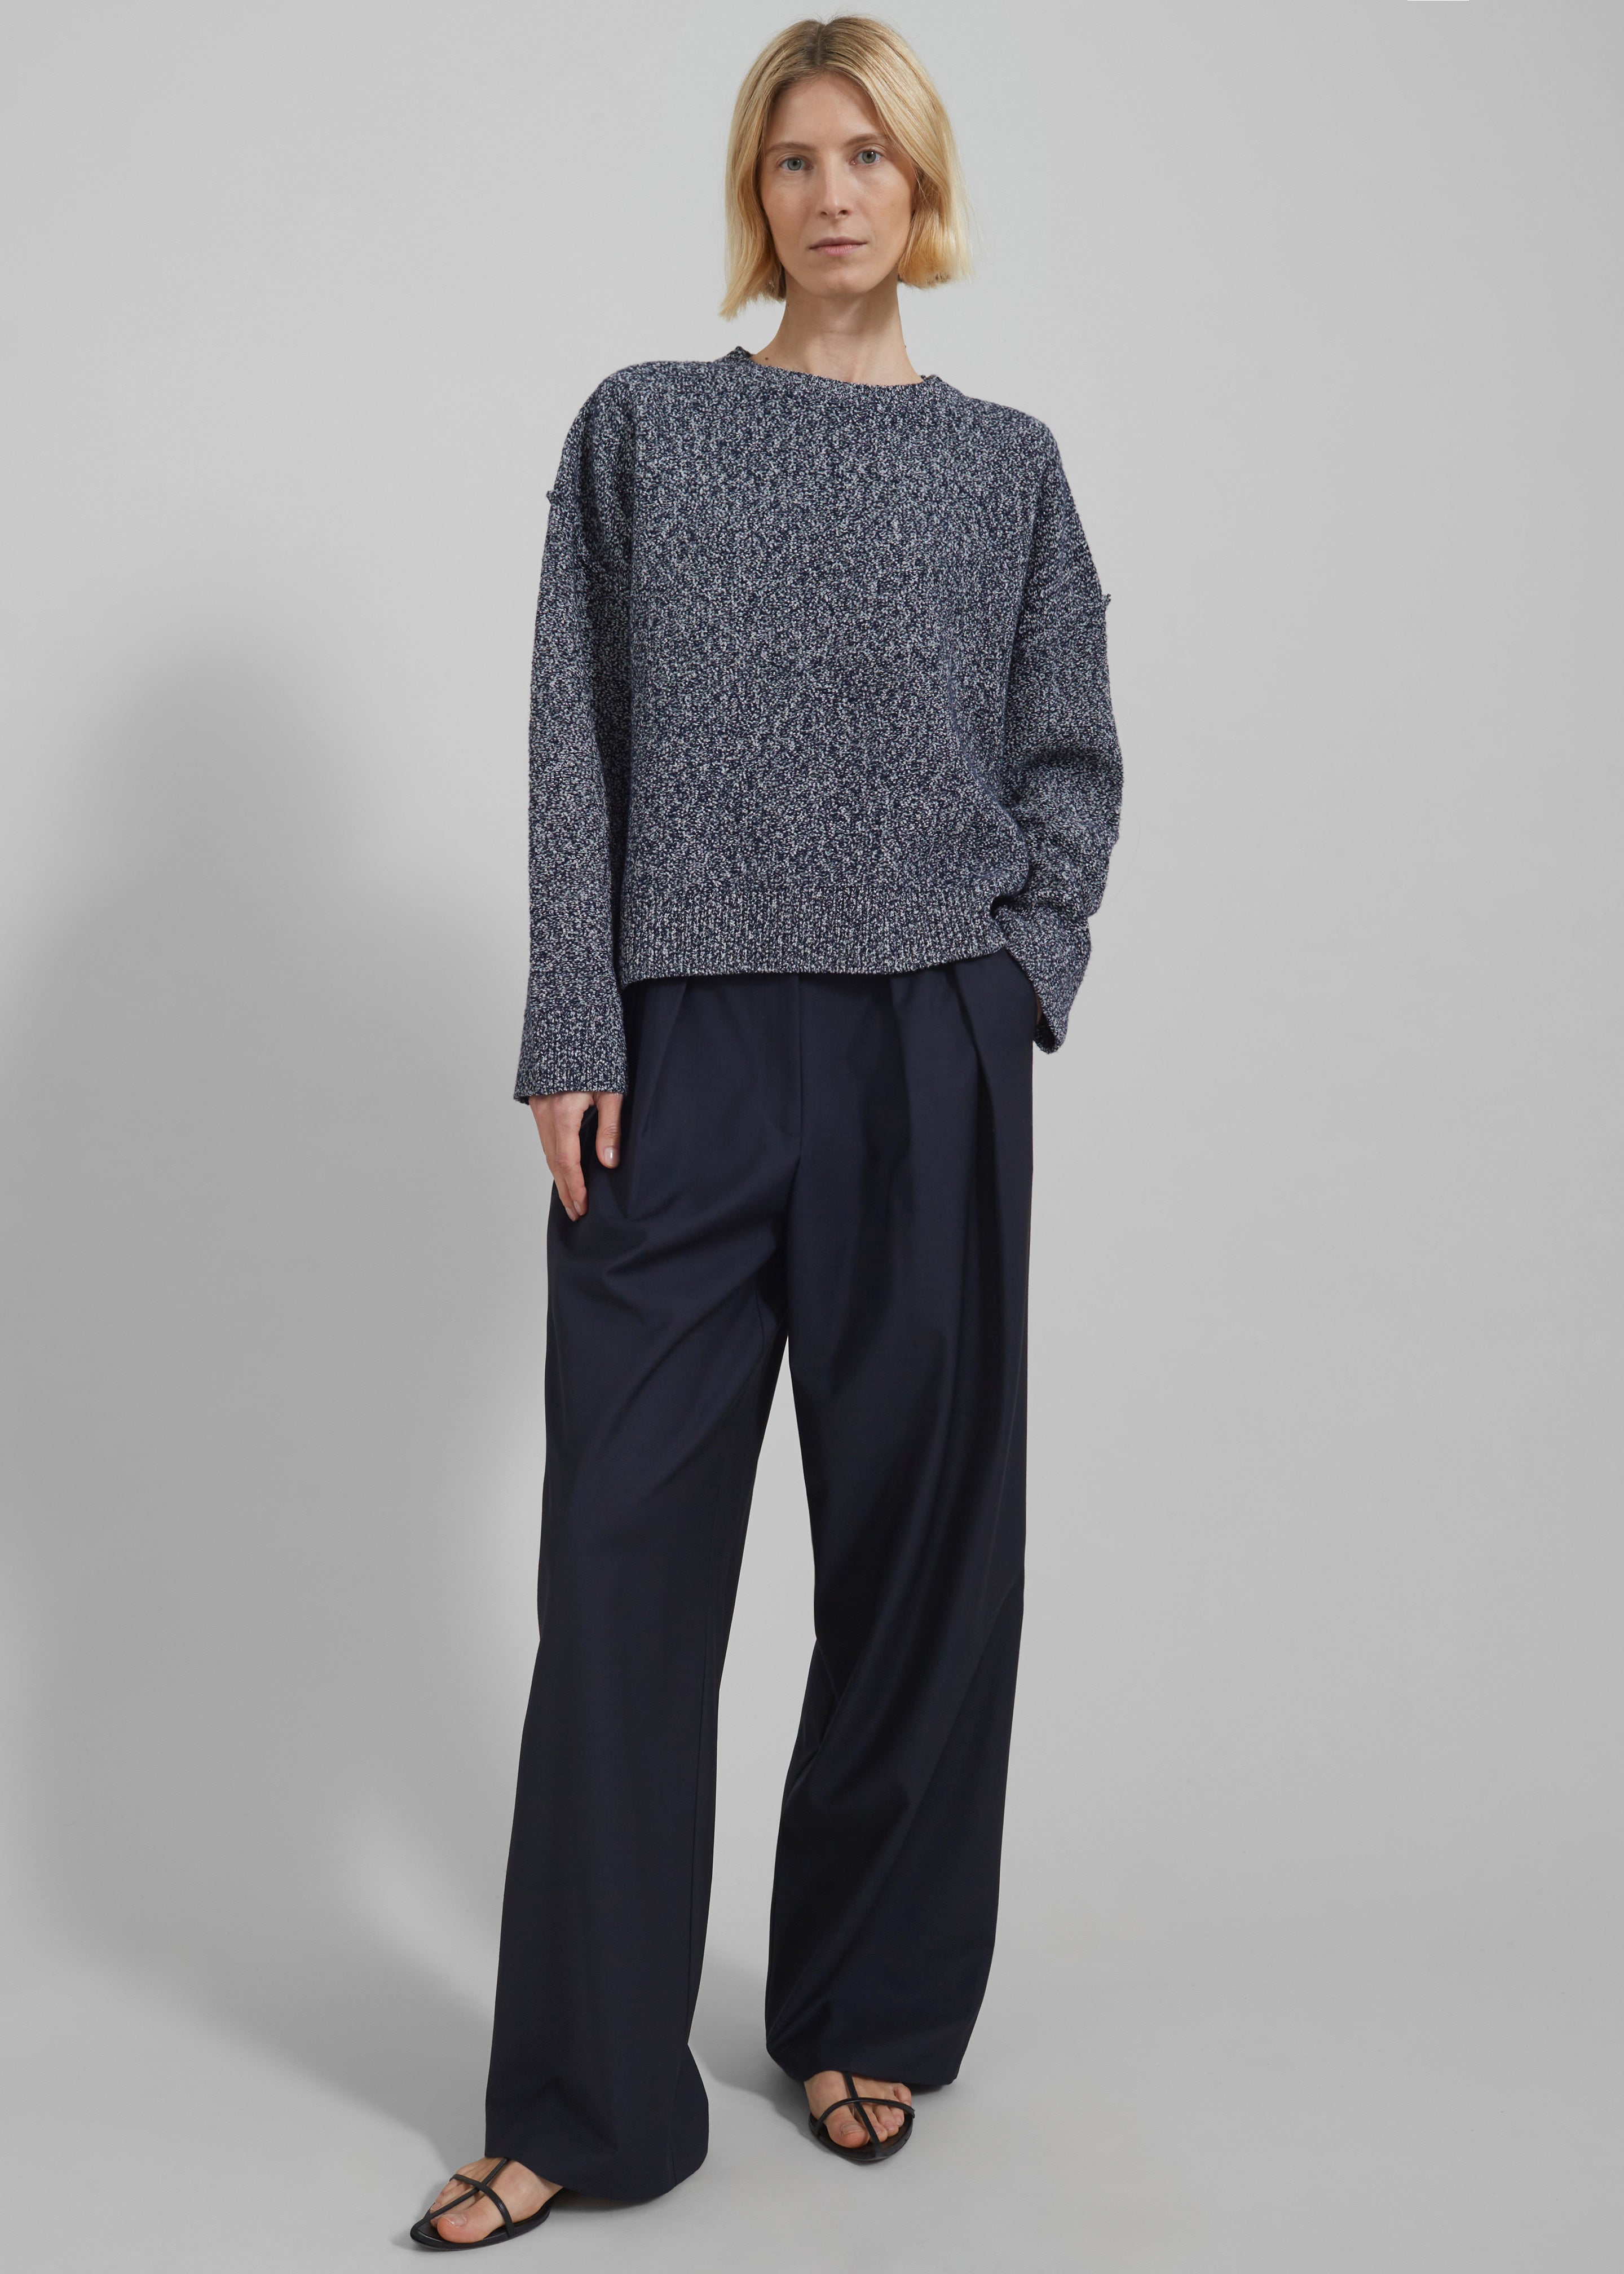 Proenza Schouler White Label Remy Sweater In Marled Knits - Dark Blue/Off White - 1